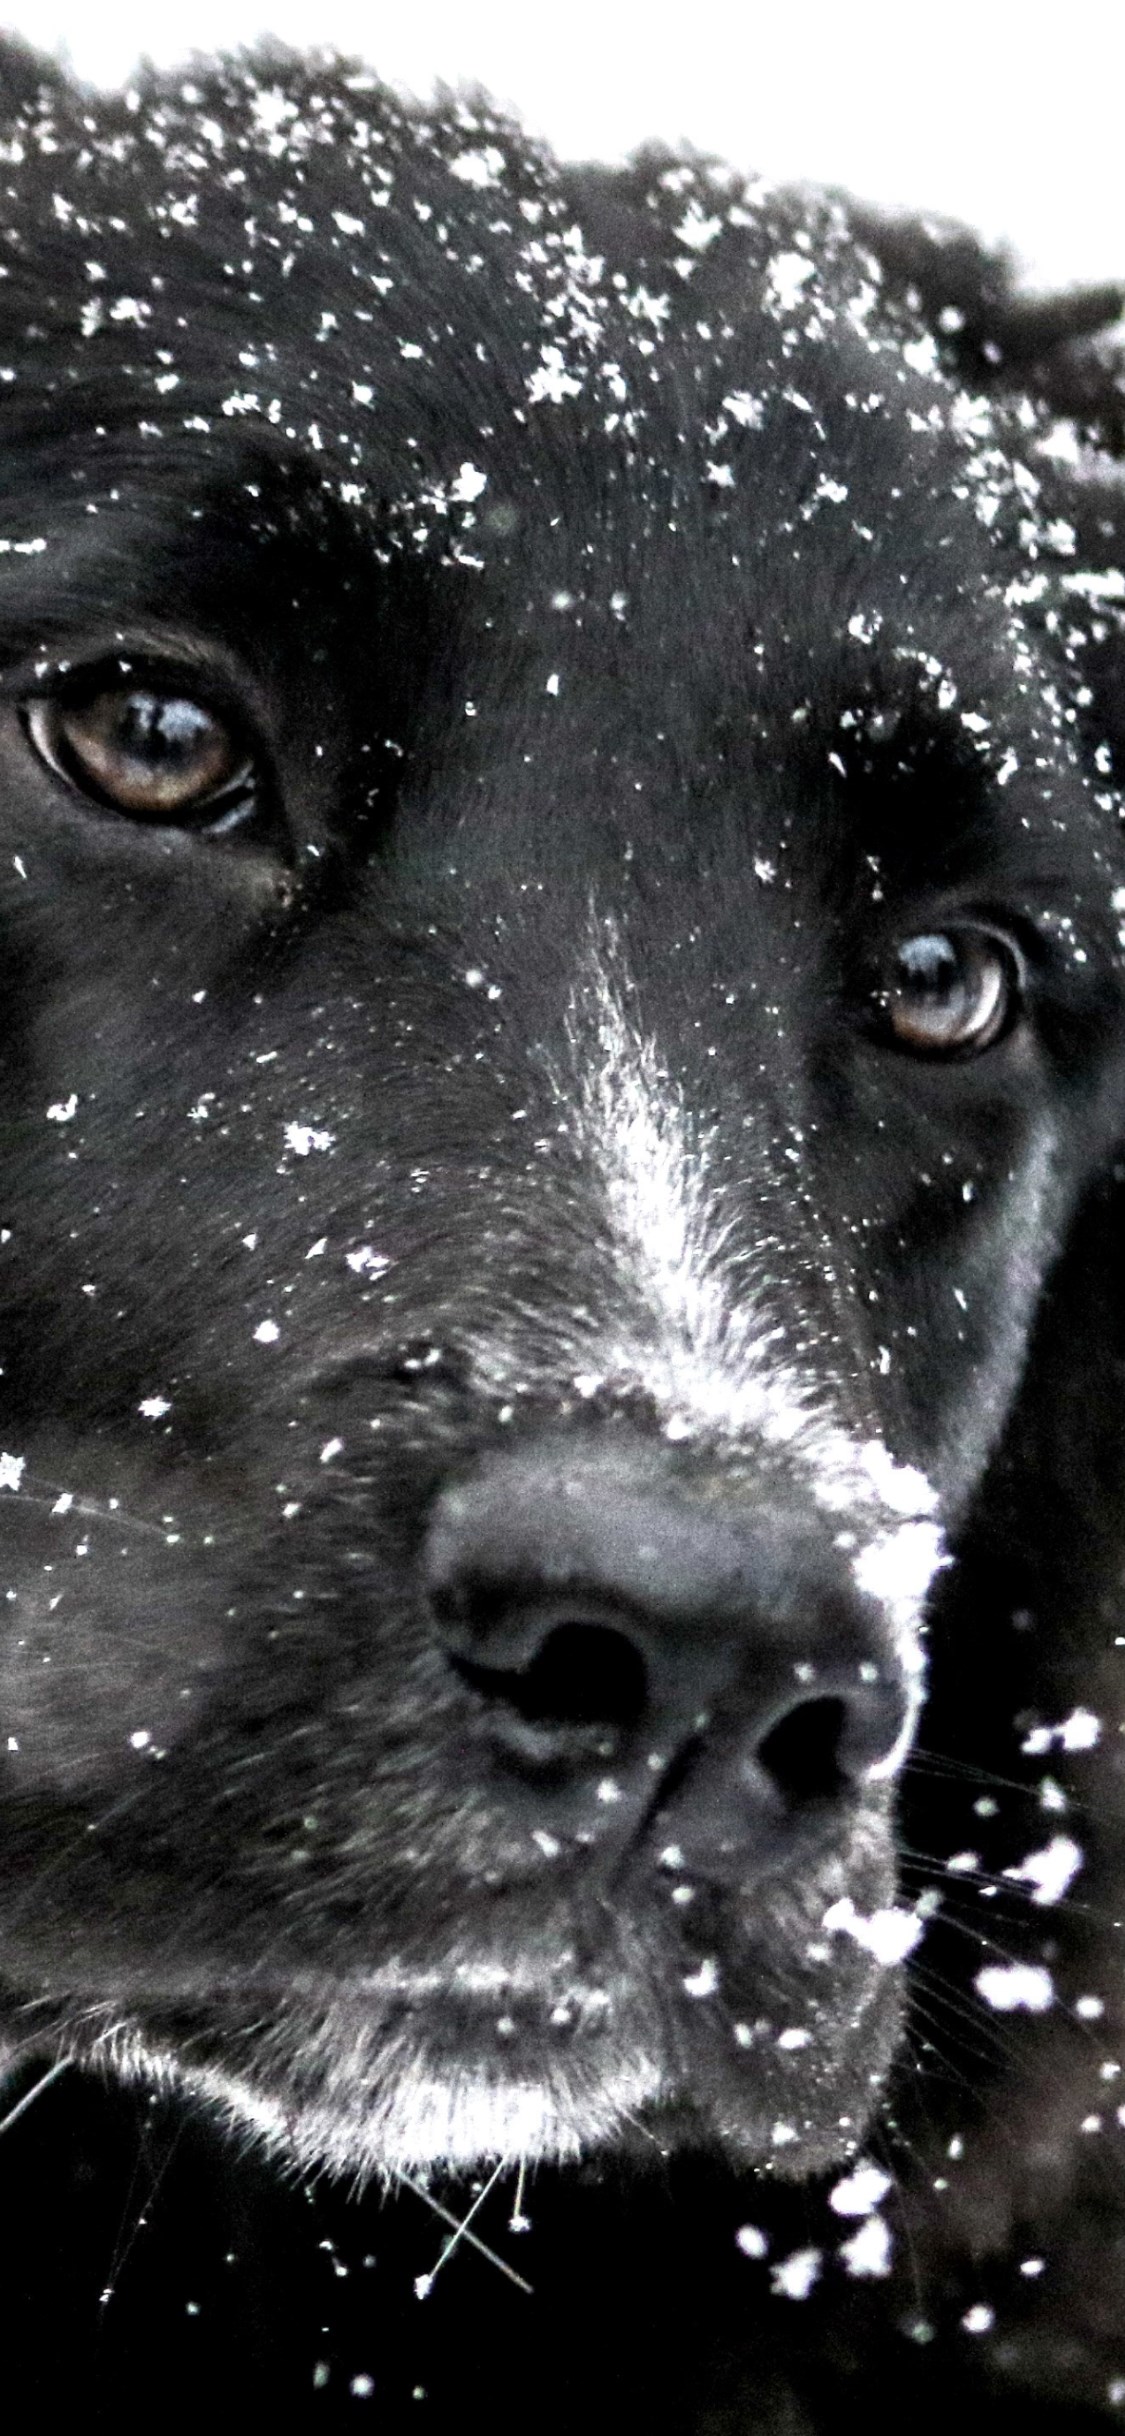 Snowing over the cute dog wallpaper 1125x2436